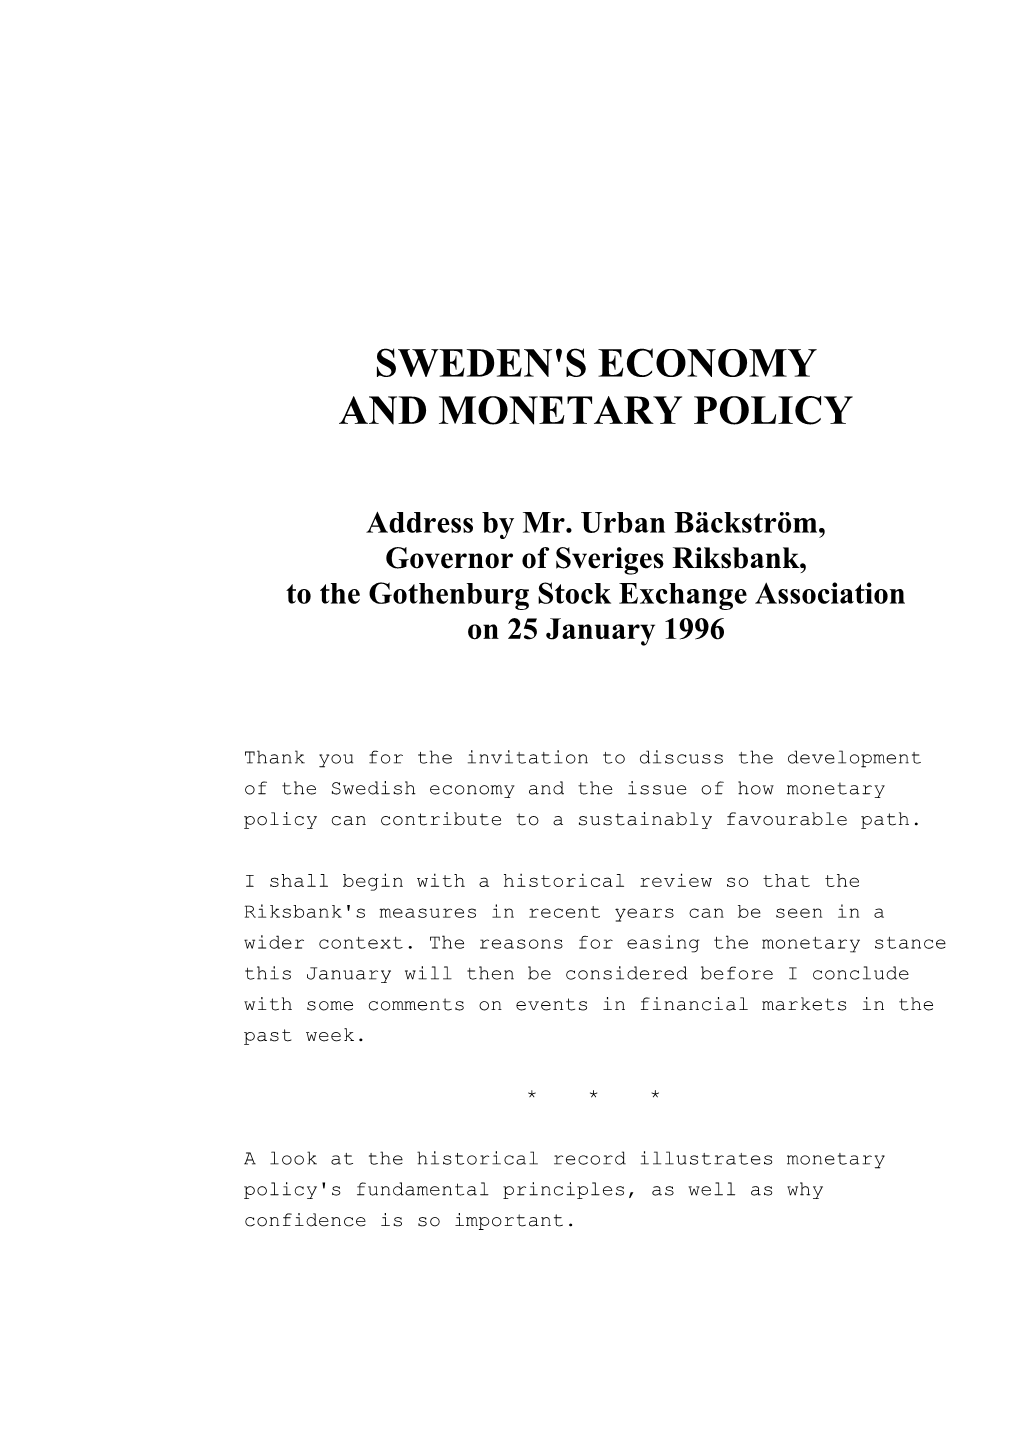 Sweden's Economy and Monetary Policy